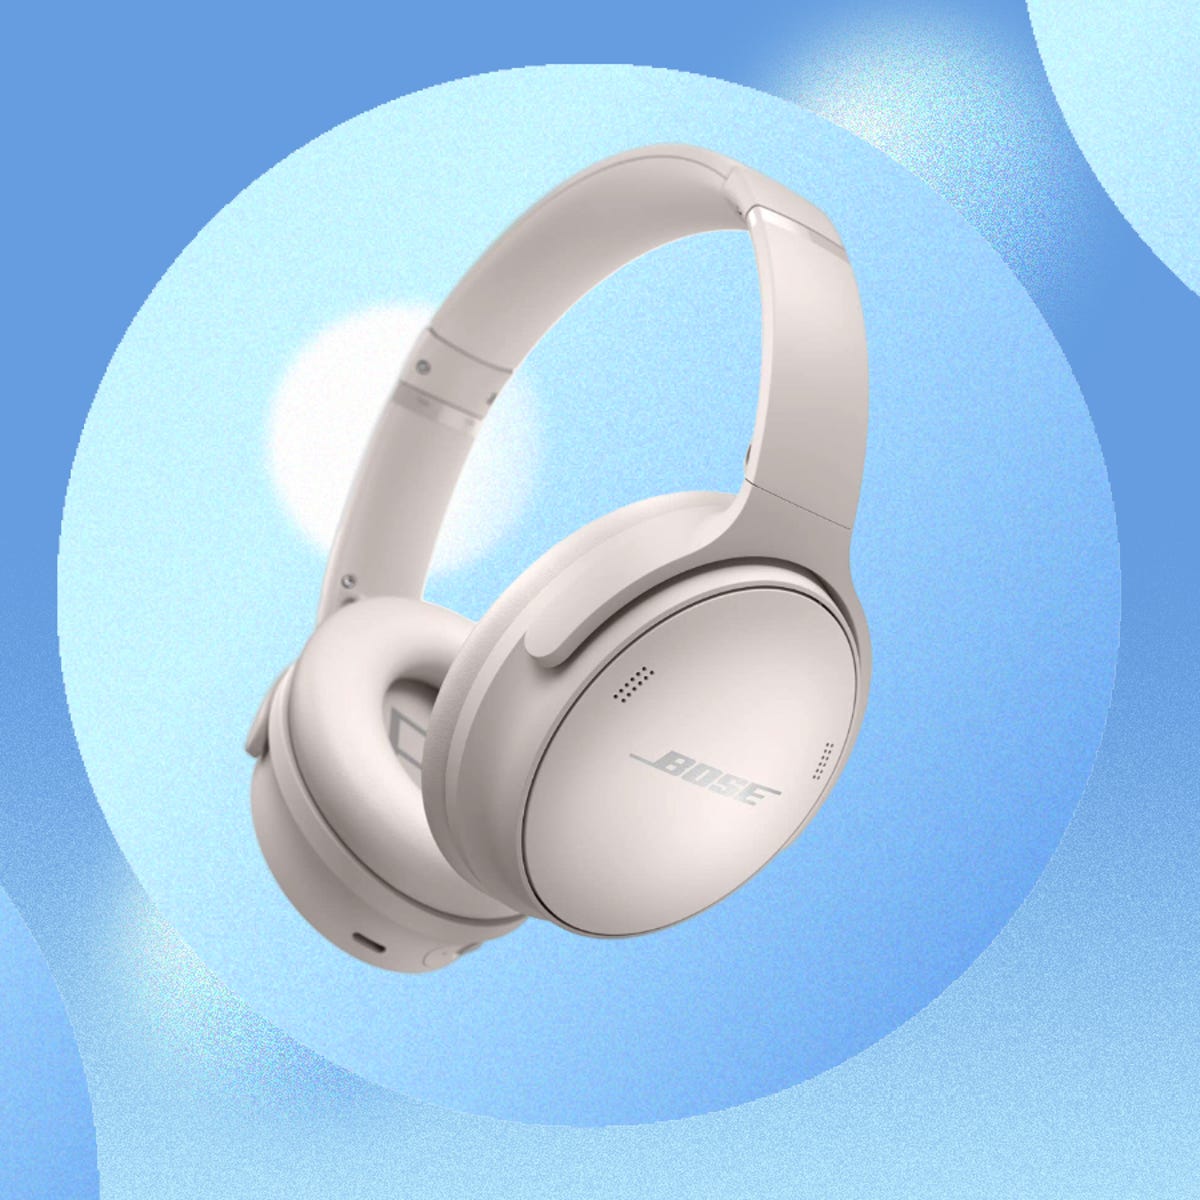 Bose's Best Noise-Canceling Headphones Are Available at an Discount Right Now - CNET